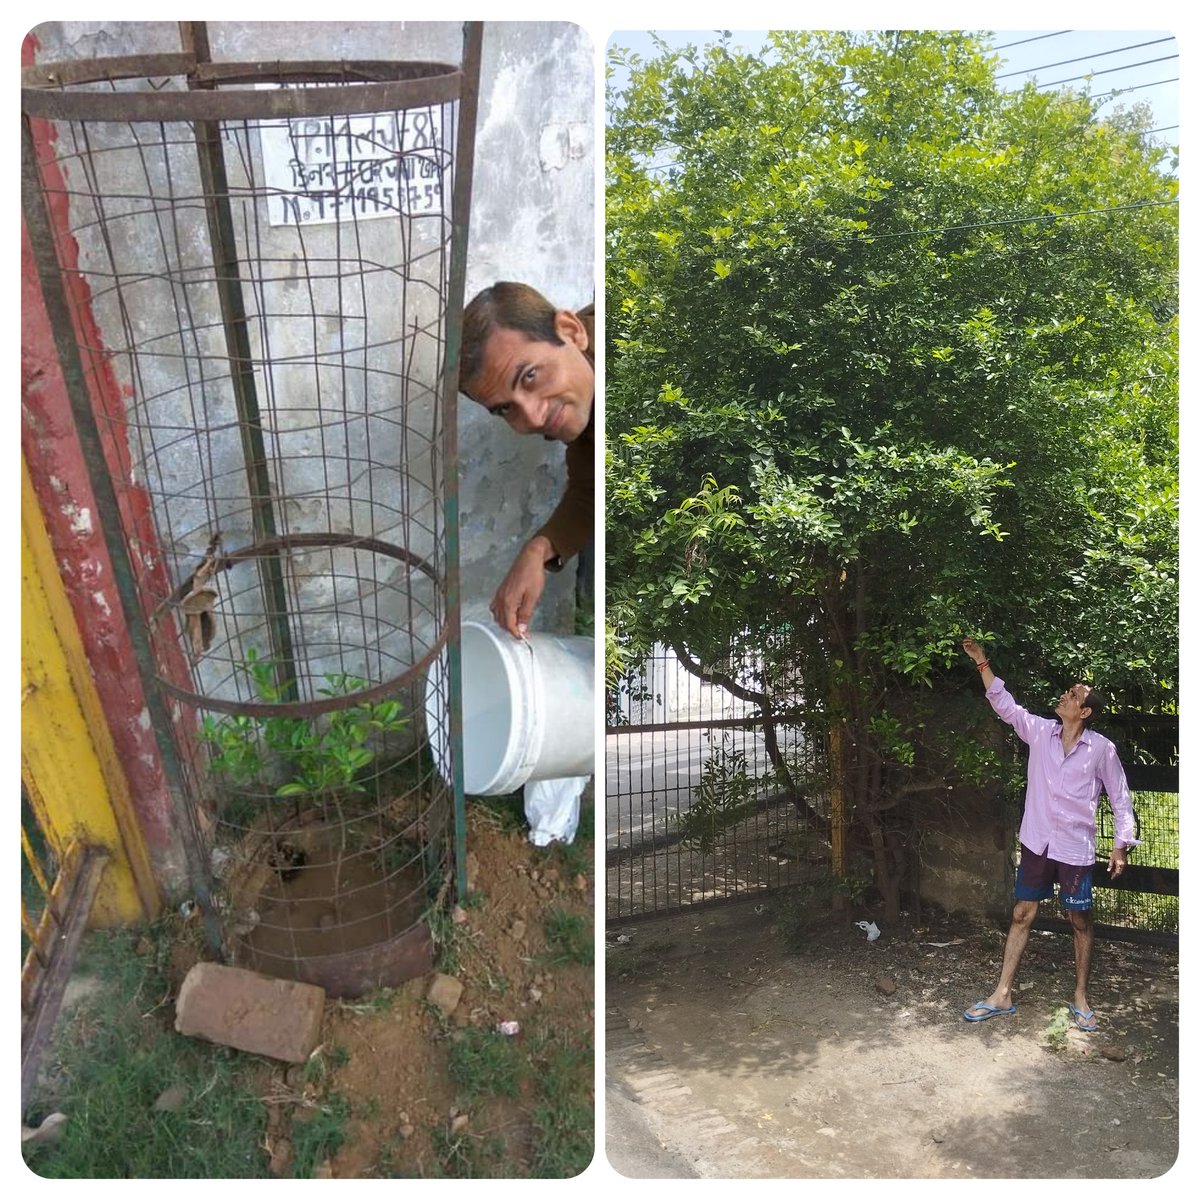 THEN nd NOW.. By Lord Shri krishna's grace.. Lemon sapling no. 845 planted on 13/03/17 at sec-7 Rajnagar #onetreeeverydaysaveearthcampaign #CarbonSequestration #fightclimatechange #KingdomAnimaliaTrust #afforestation #OnlyOneEarth #BeatAirPollution #WorldEnvironmentDay2023